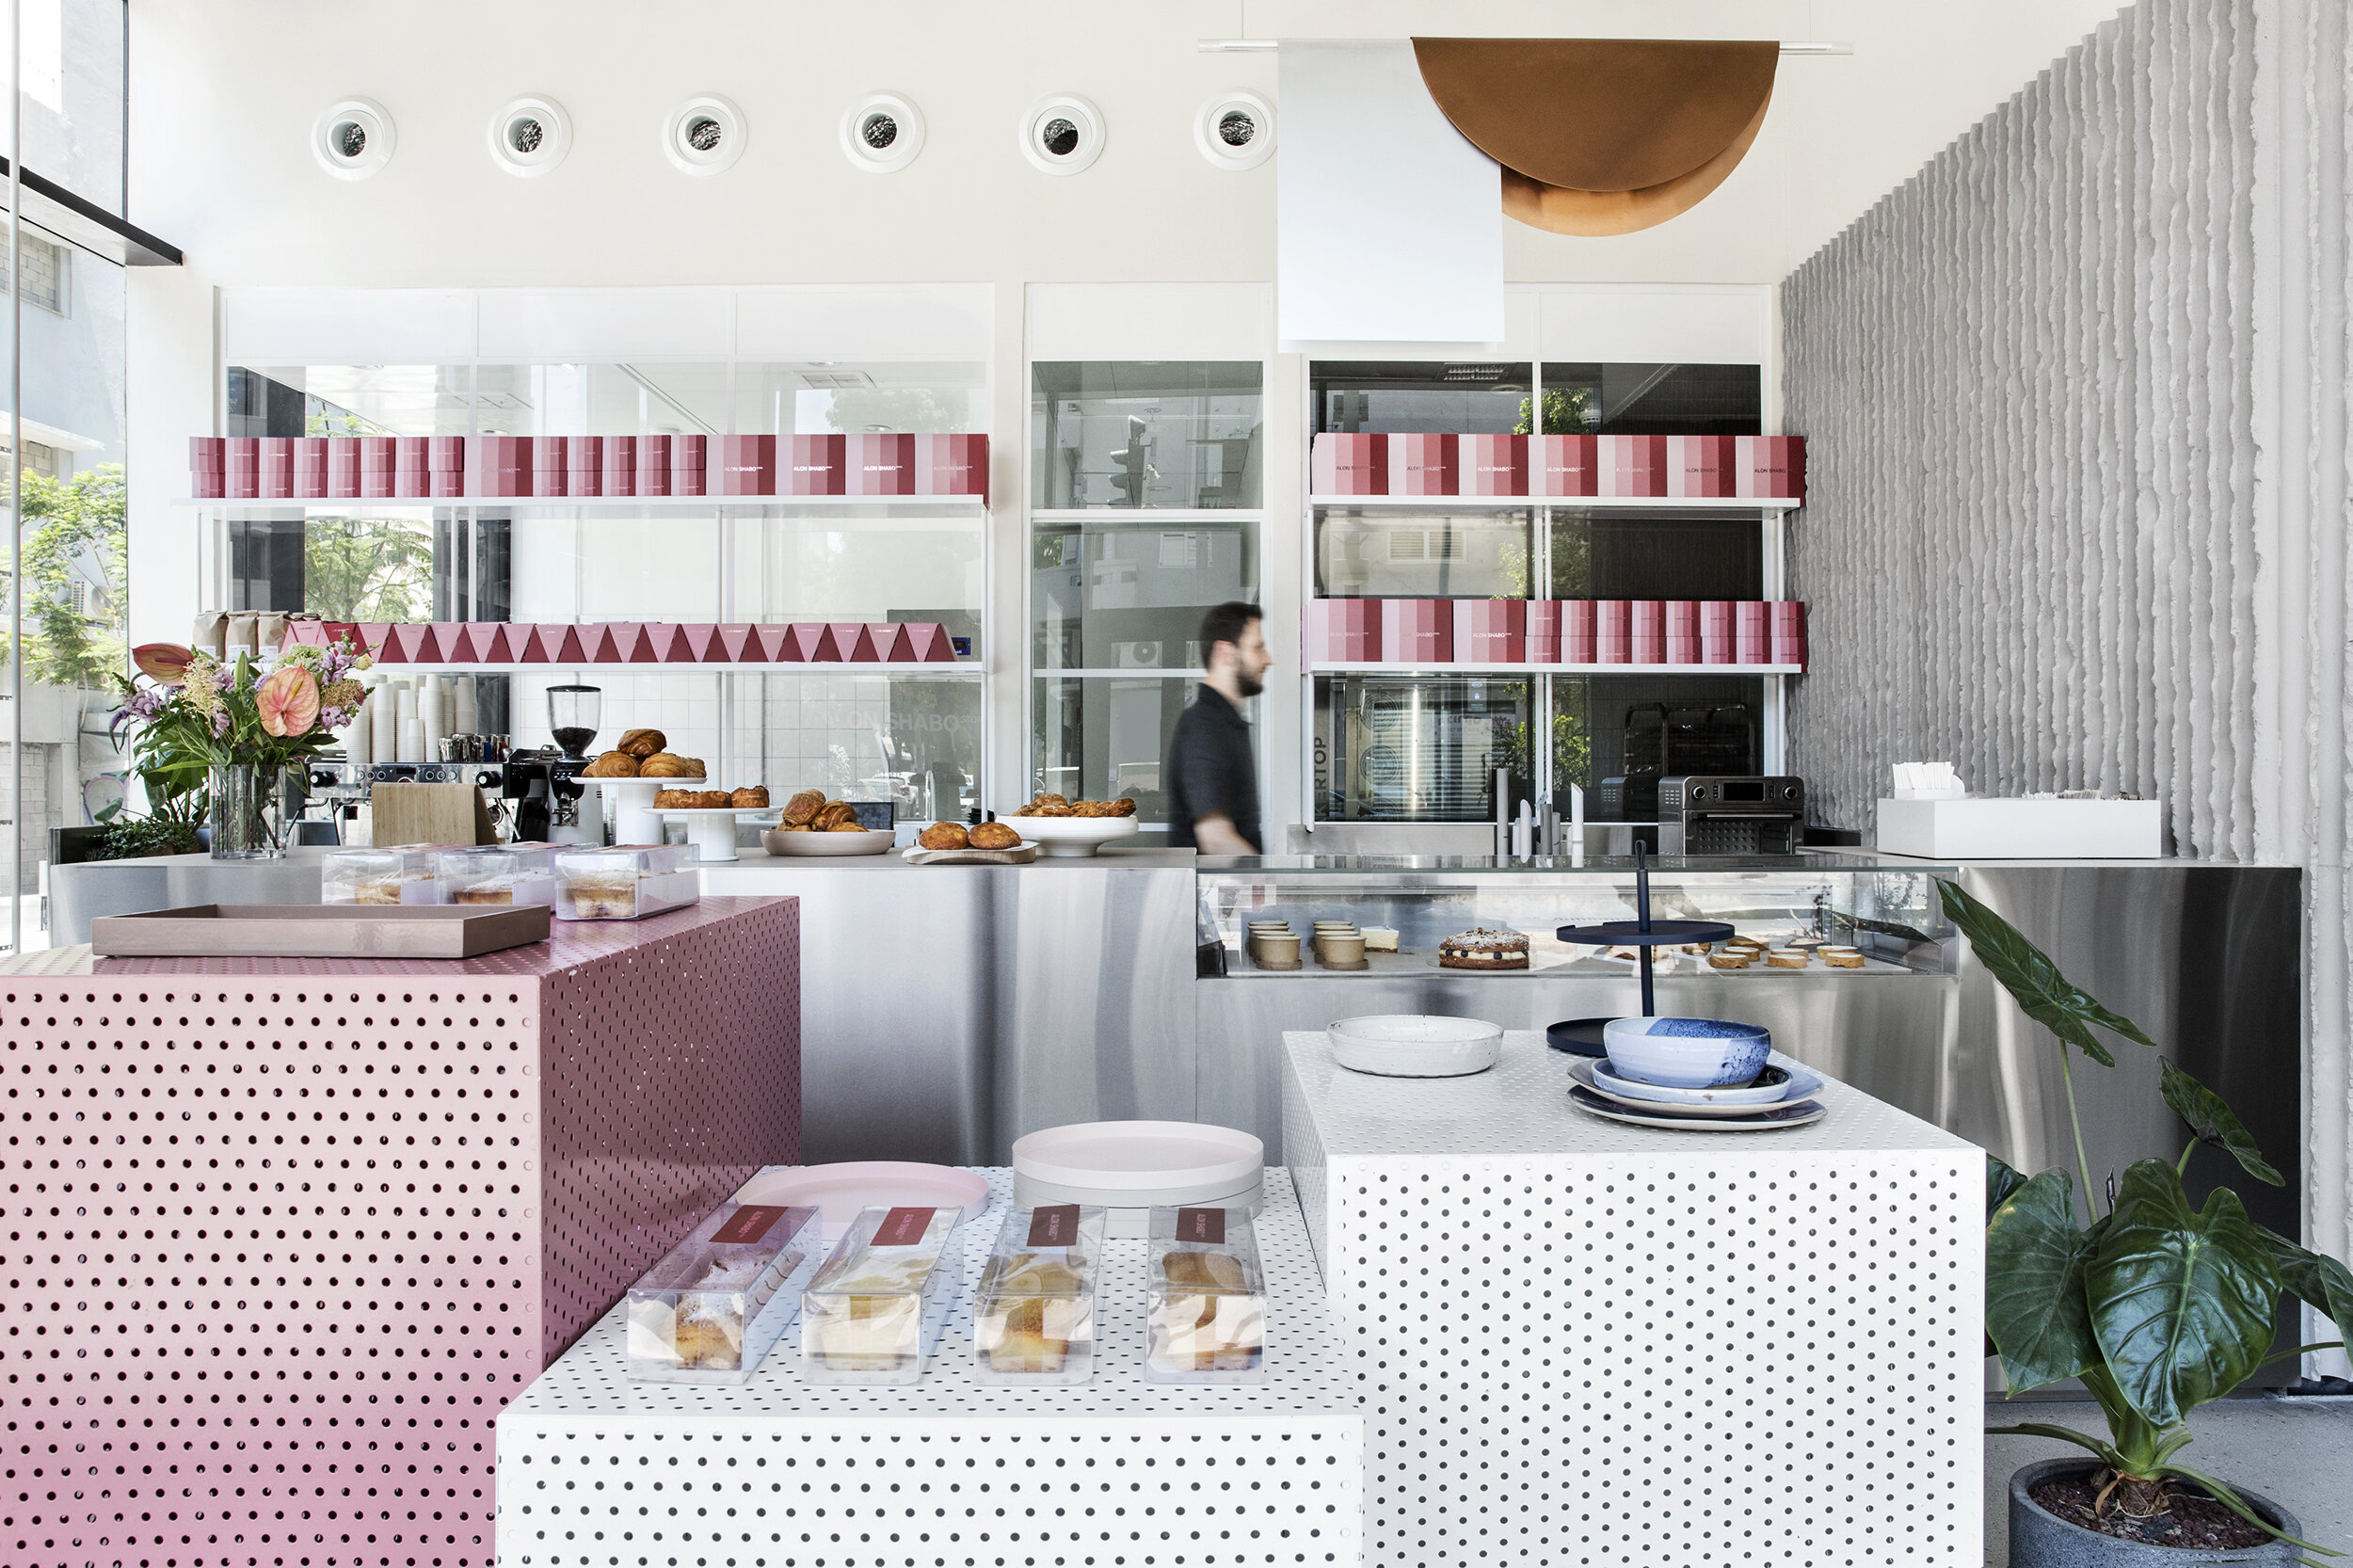 Alon Shabo store, perforated metal boxes in white and pink